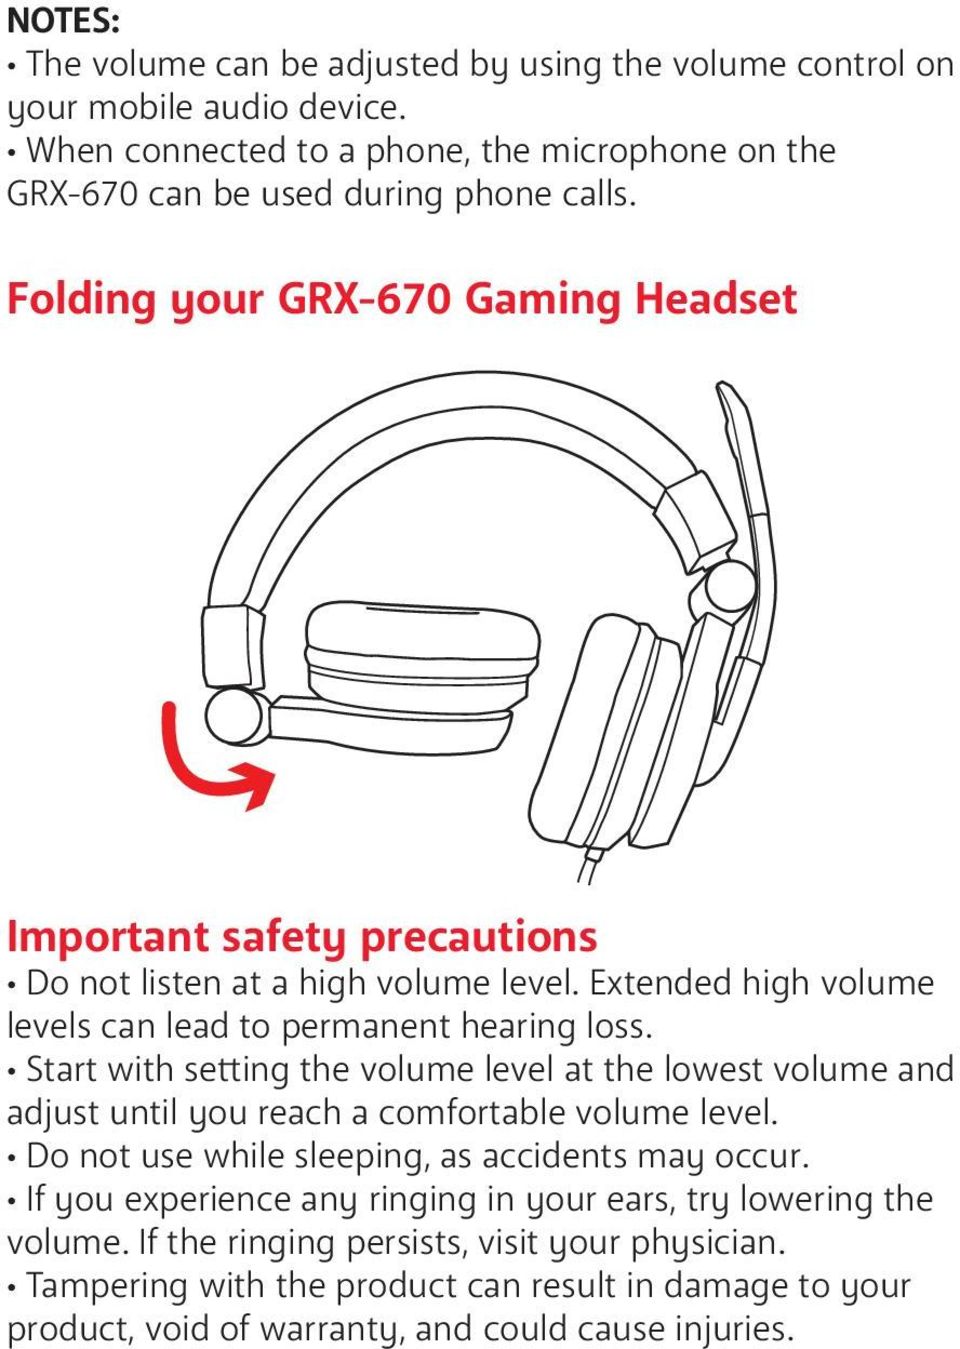 Start with setting the volume level at the lowest volume and adjust until you reach a comfortable volume level. Do not use while sleeping, as accidents may occur.